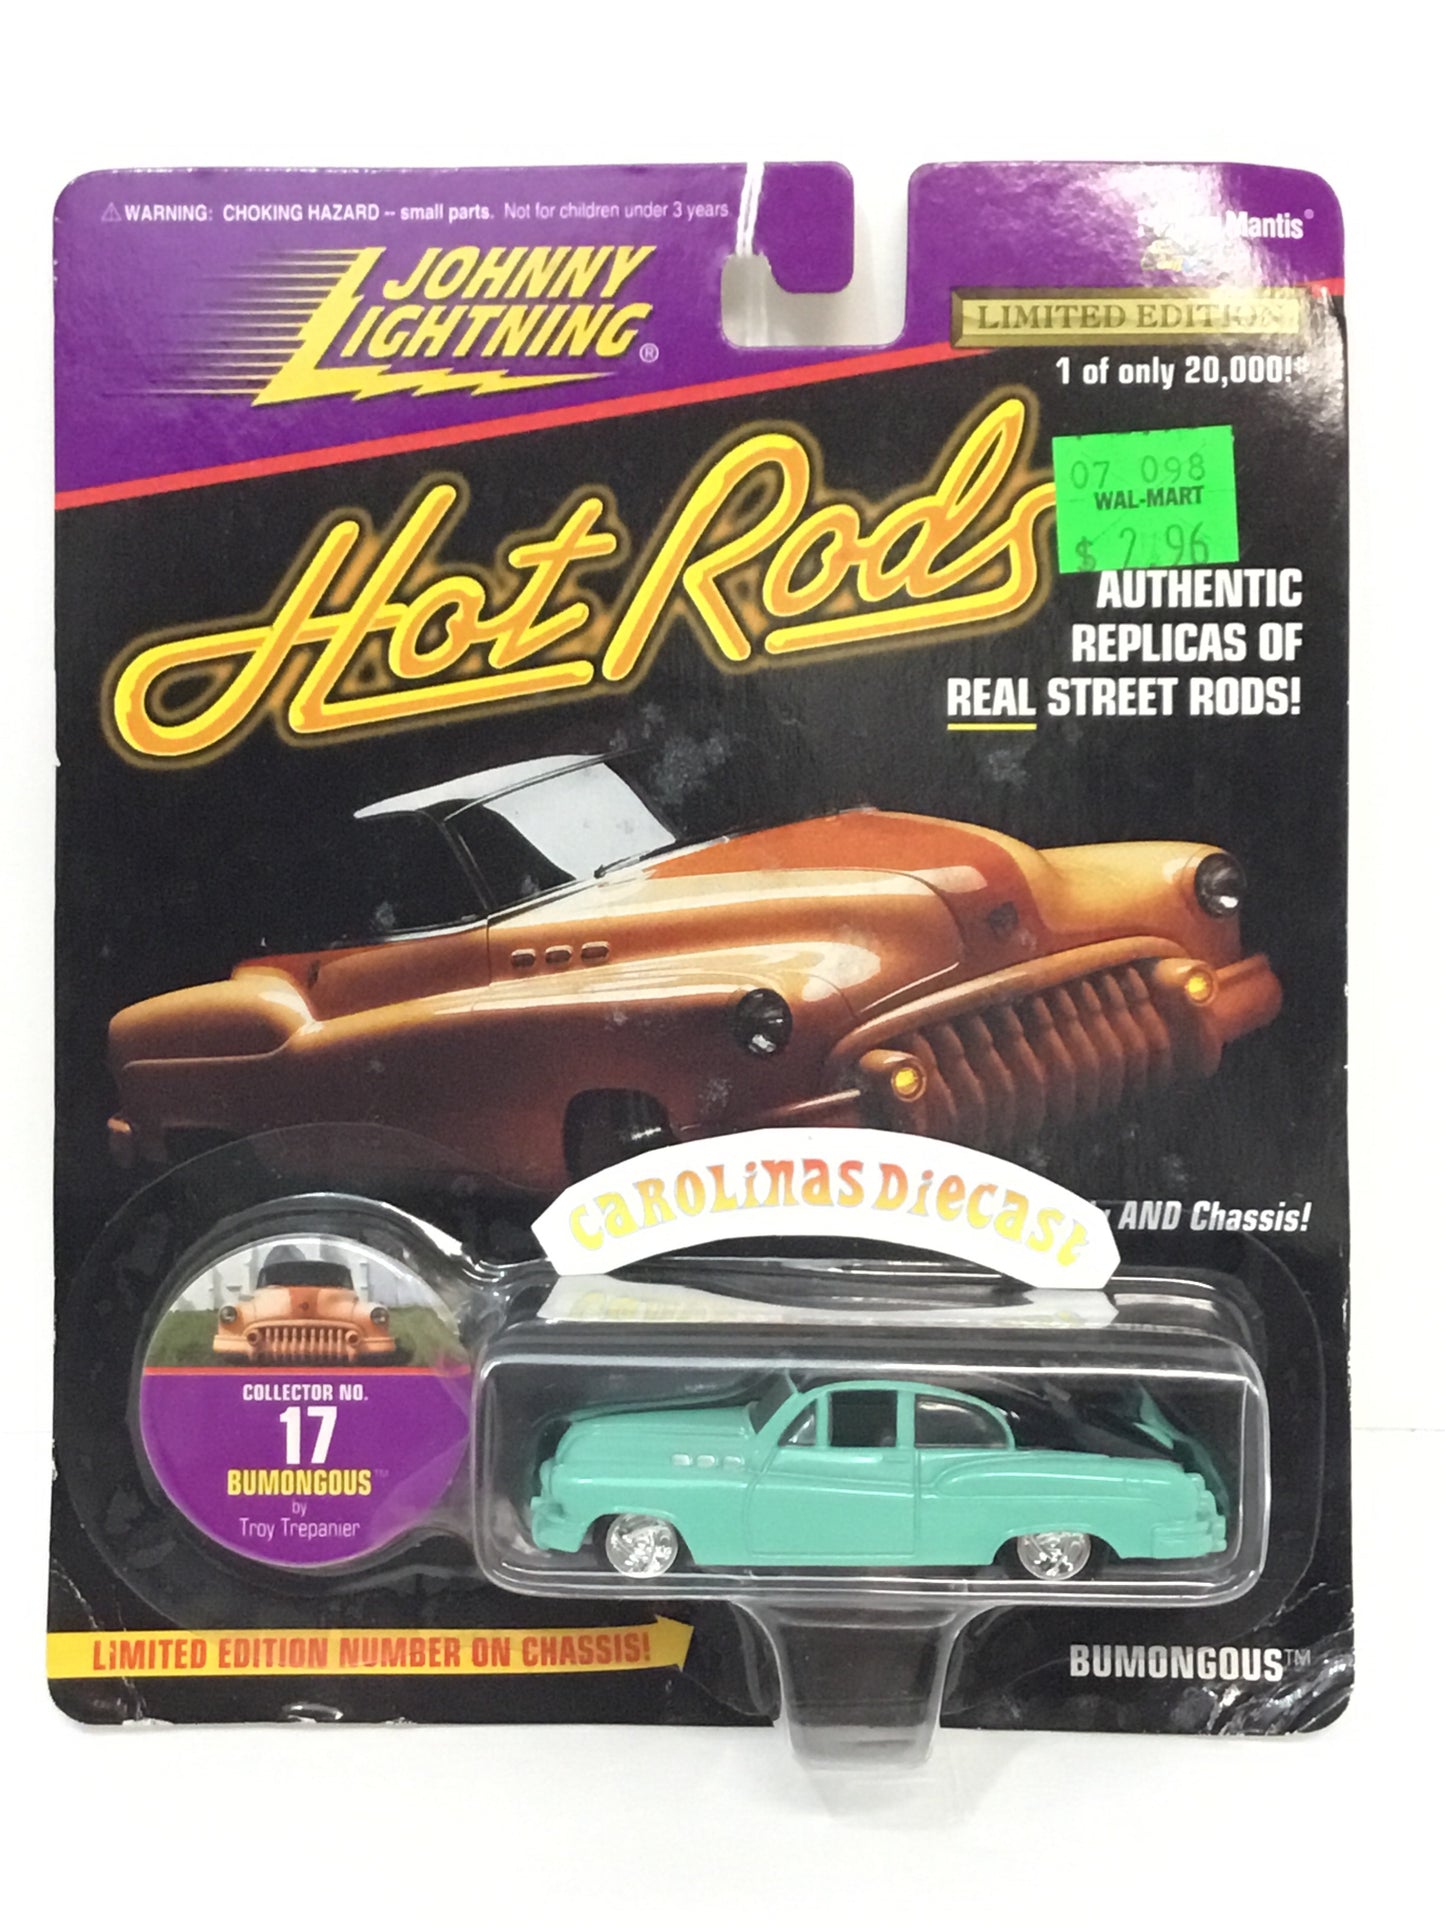 Johnny lightning Hot rods Bumongous (mint color) OO7